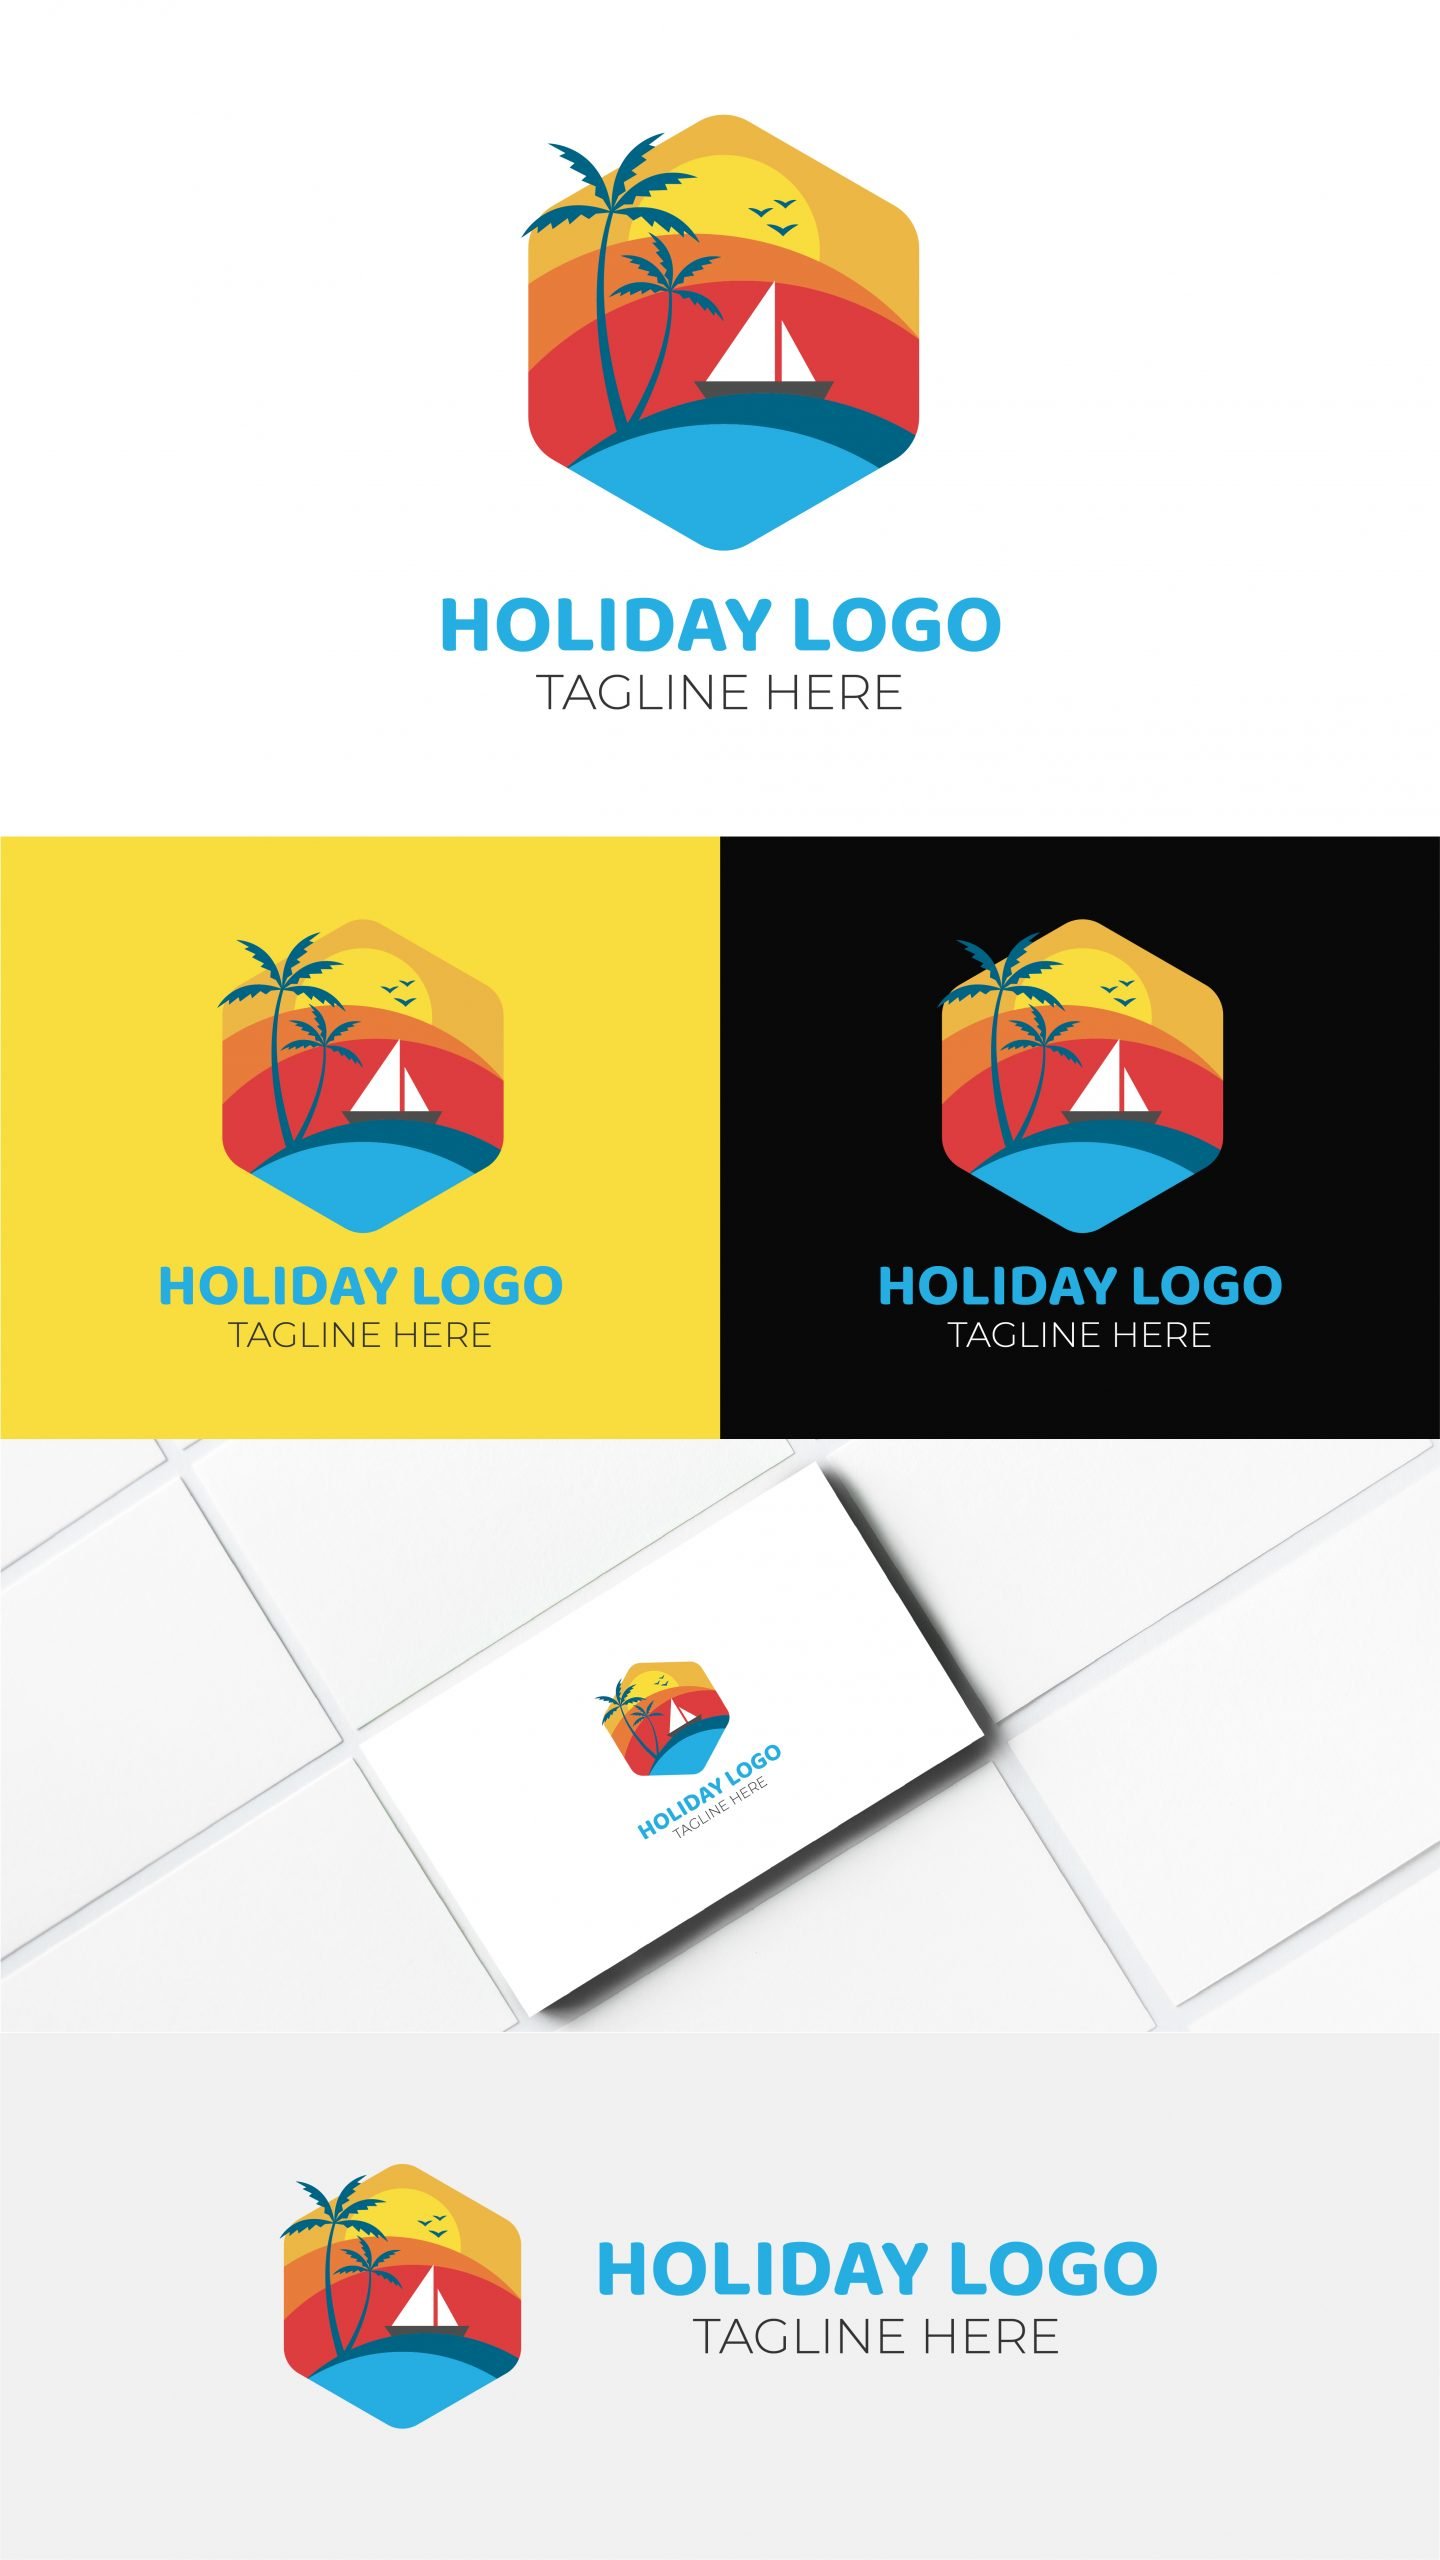 Have a Happy Holiday | Holiday logo design, Holiday logo, Have a happy  holiday